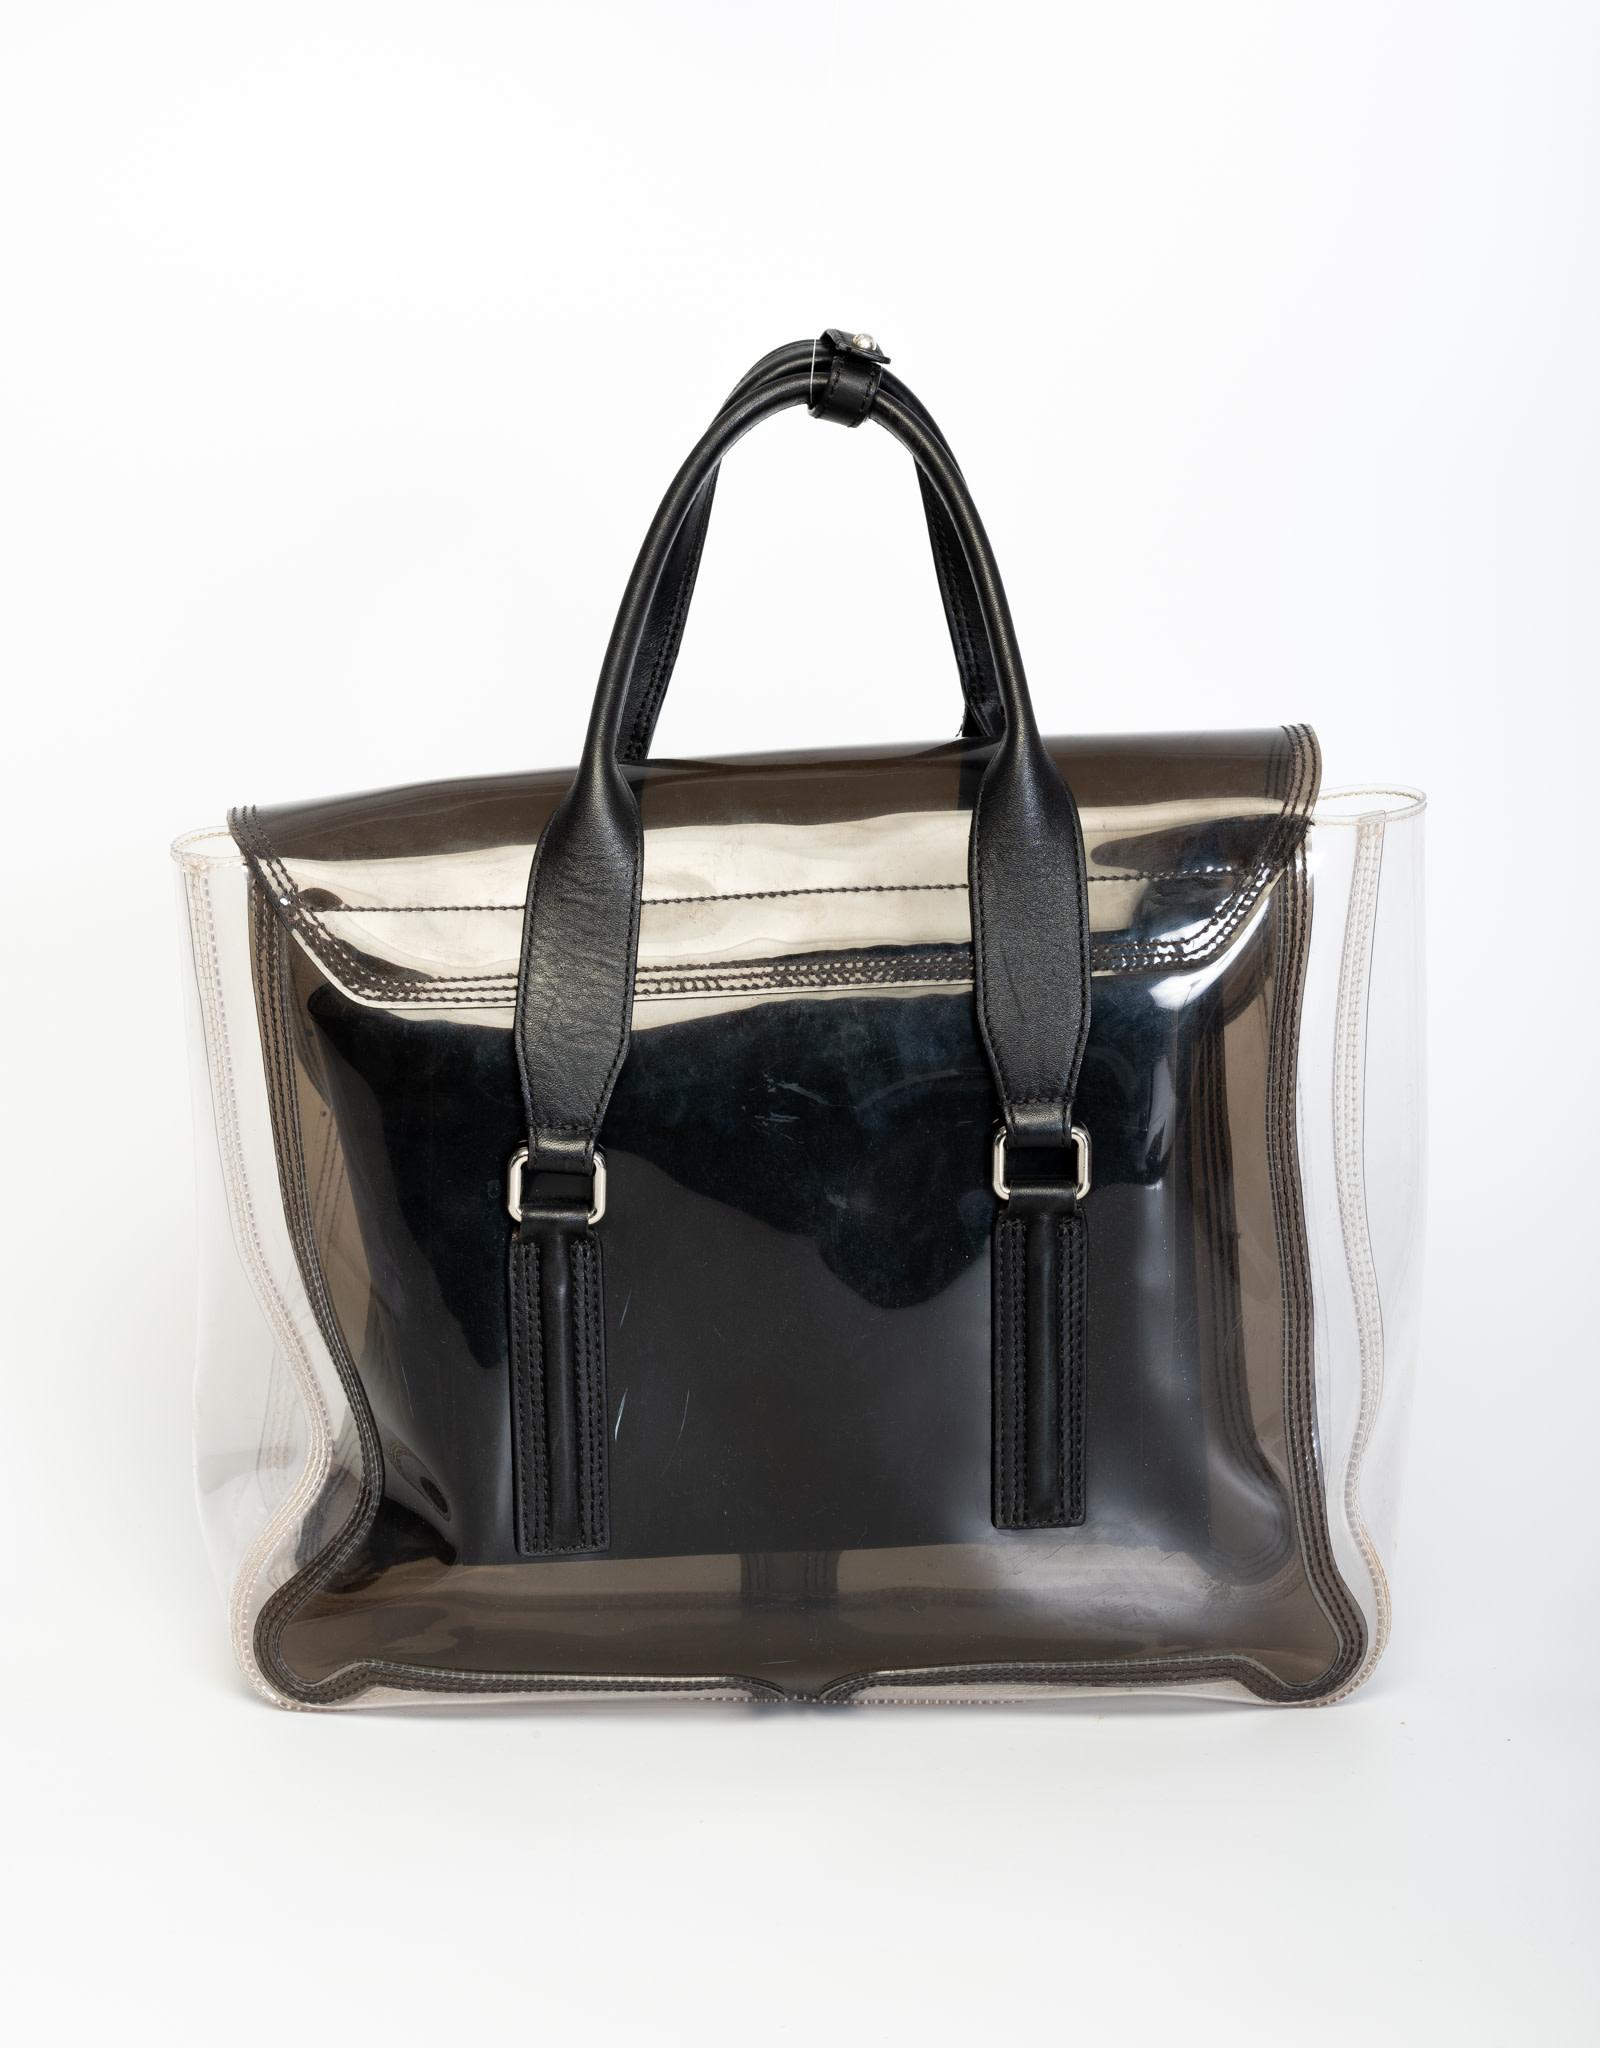 This transparent plastic satchel features a front flap with two expandable vertical zippers beneath it. Featuring leather top handles, silver tone buckle closure and an internal leather zipper pocket.

COLOR: clear/smoky black
MATERIAL: PVC with